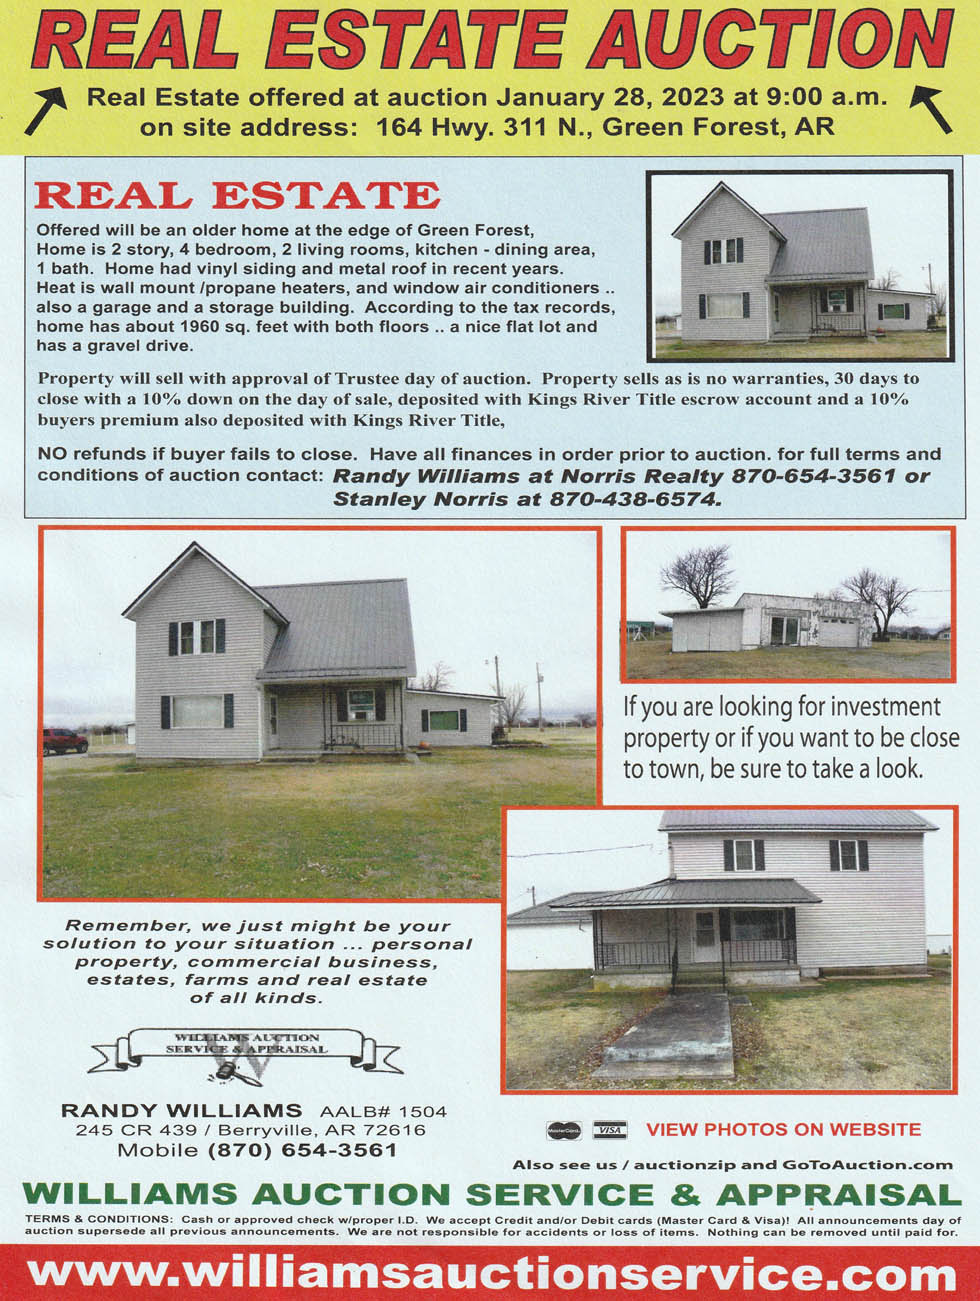 Green Forest Arkansas Real Estate Auction